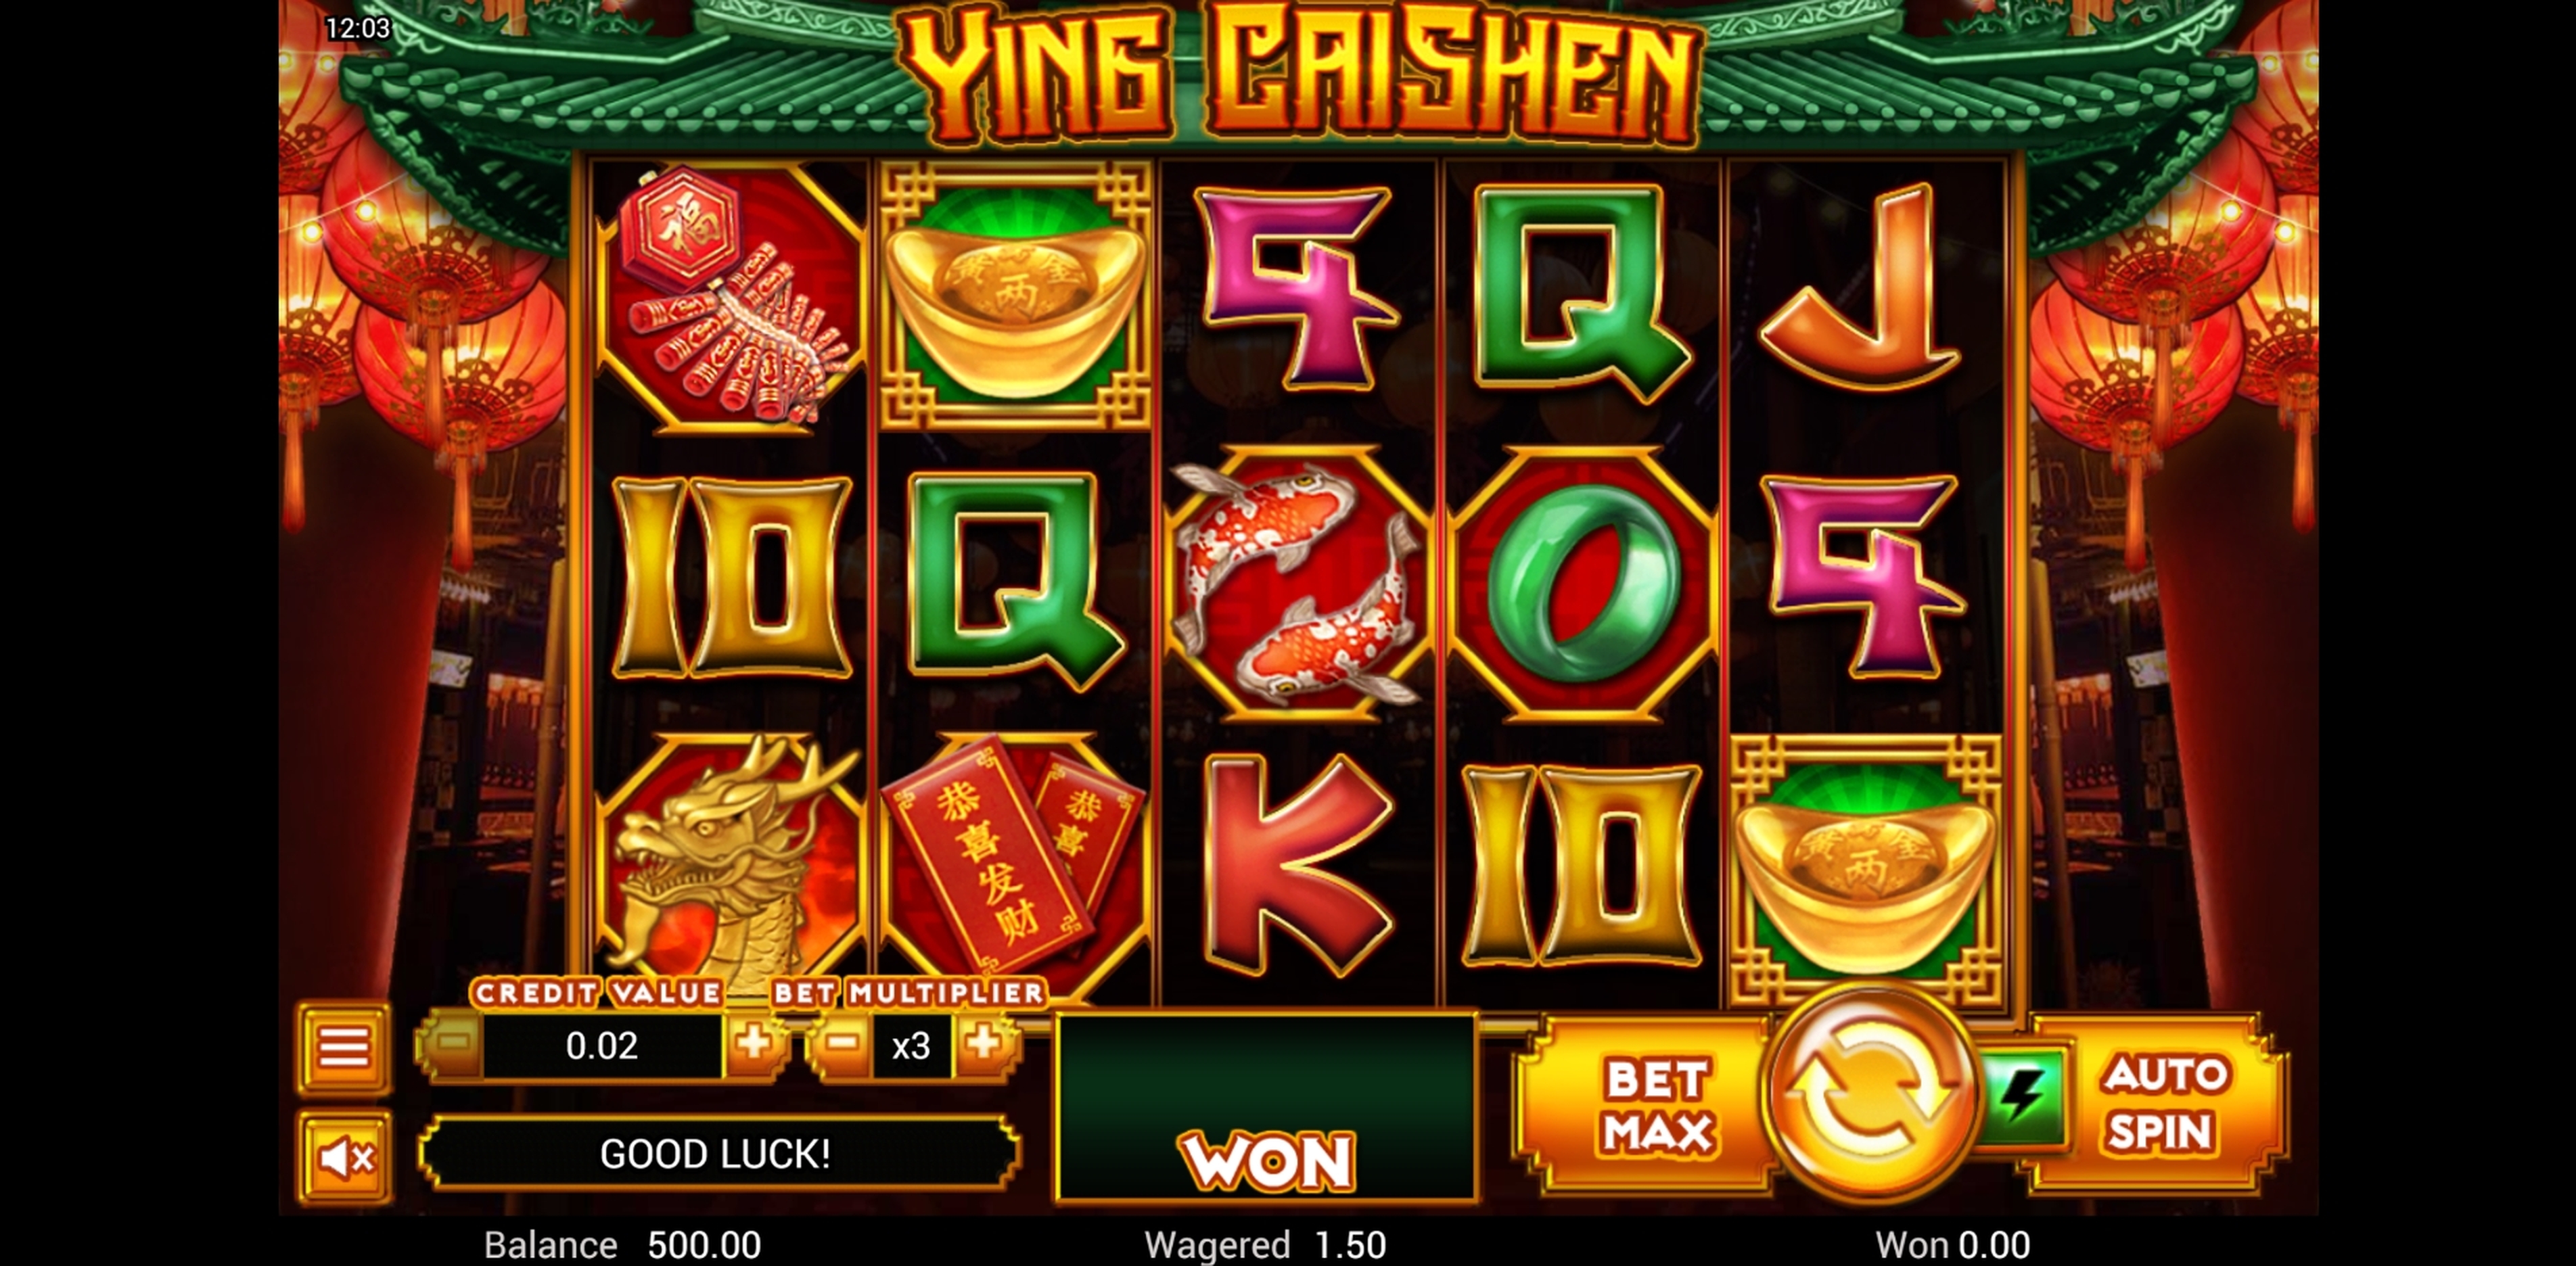 Reels in Ying Cai Shen Slot Game by Top Trend Gaming